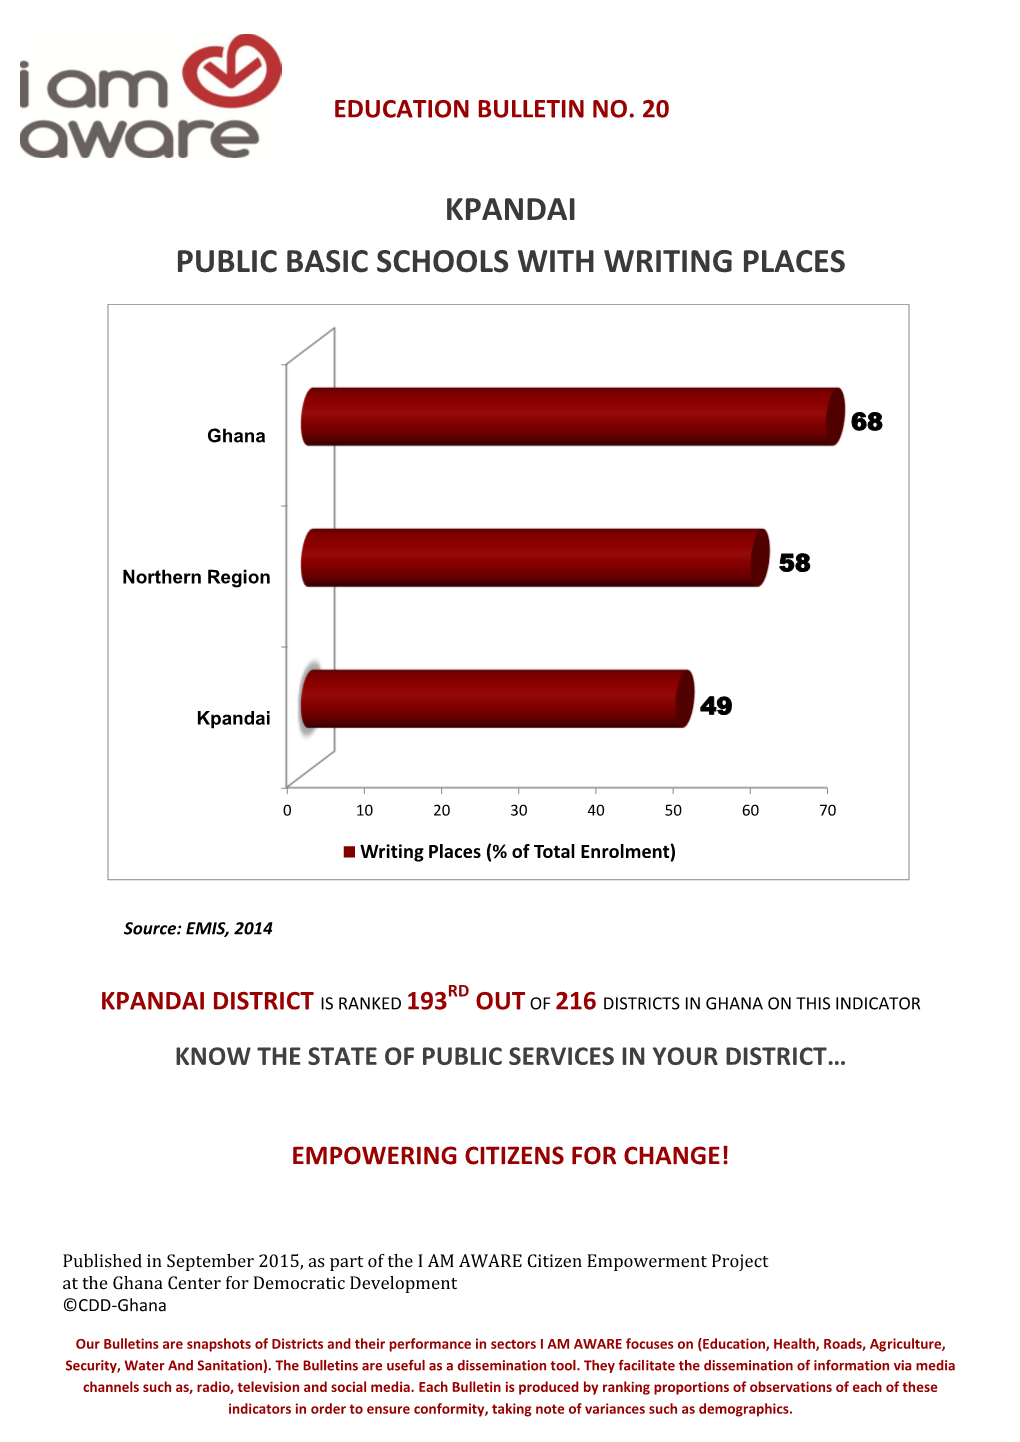 Kpandai Public Basic Schools with Writing Places